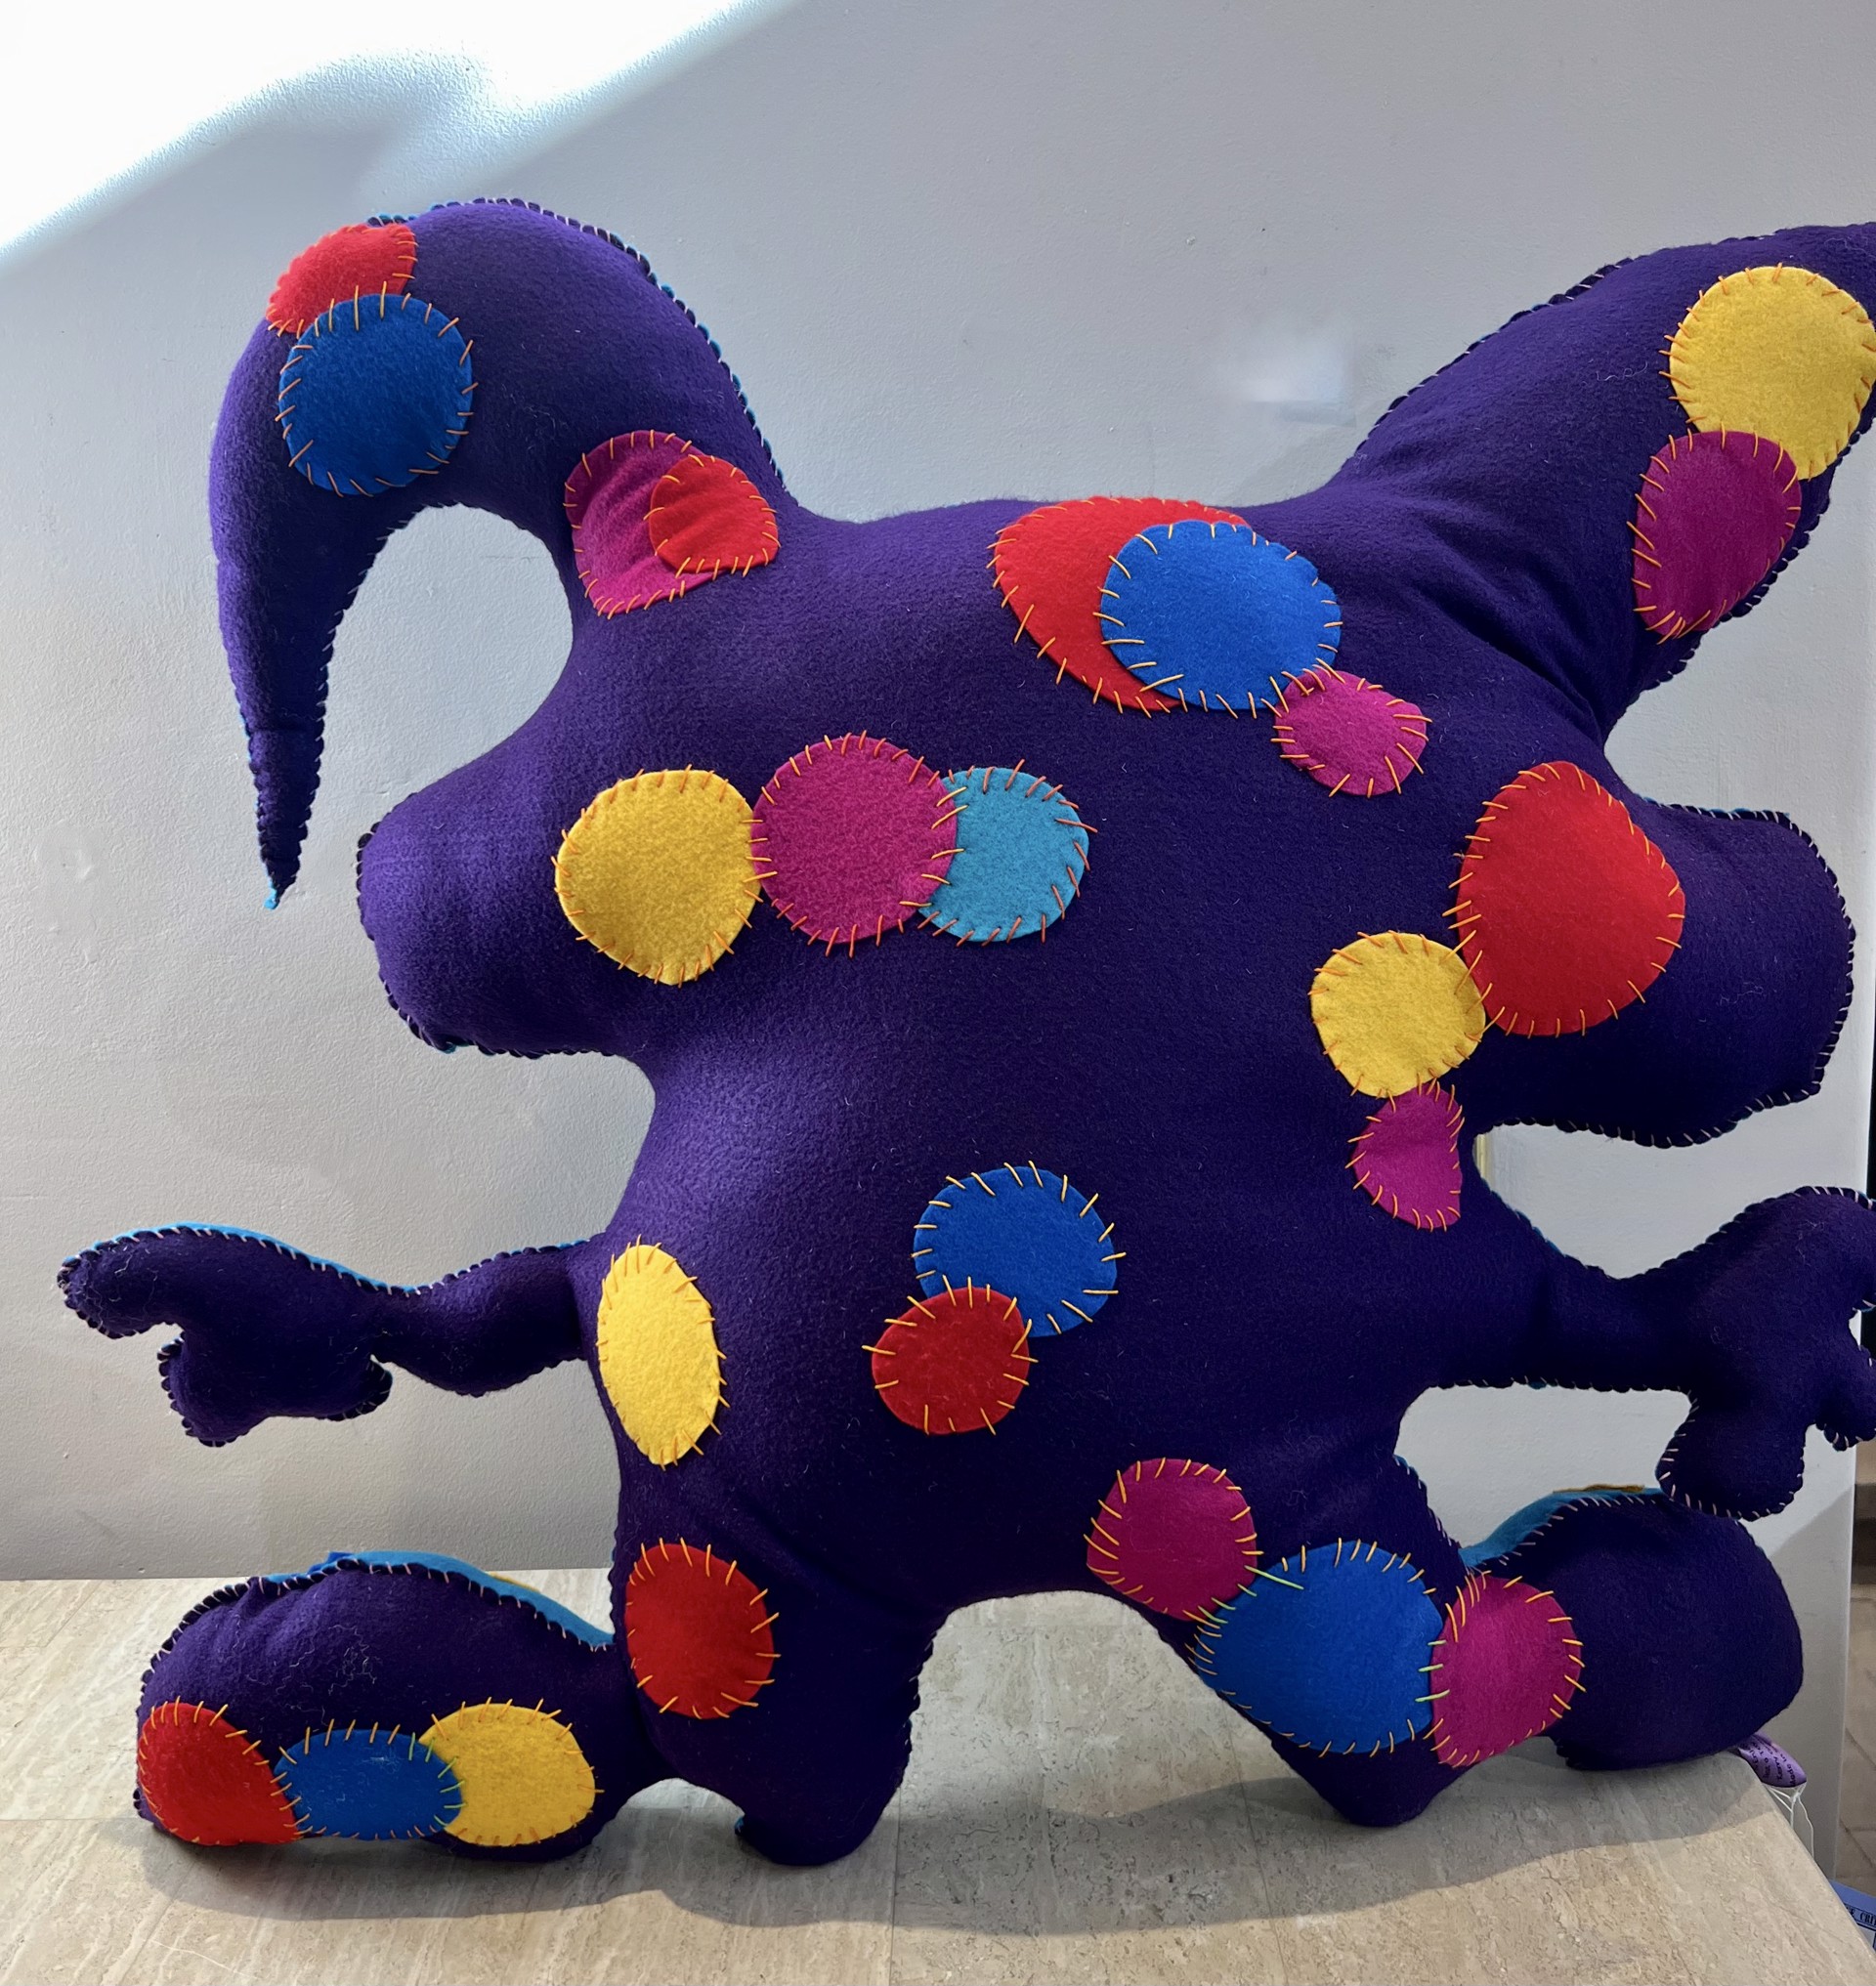 Large Free Range Critter, Turquoise + Purple by Kerry Green